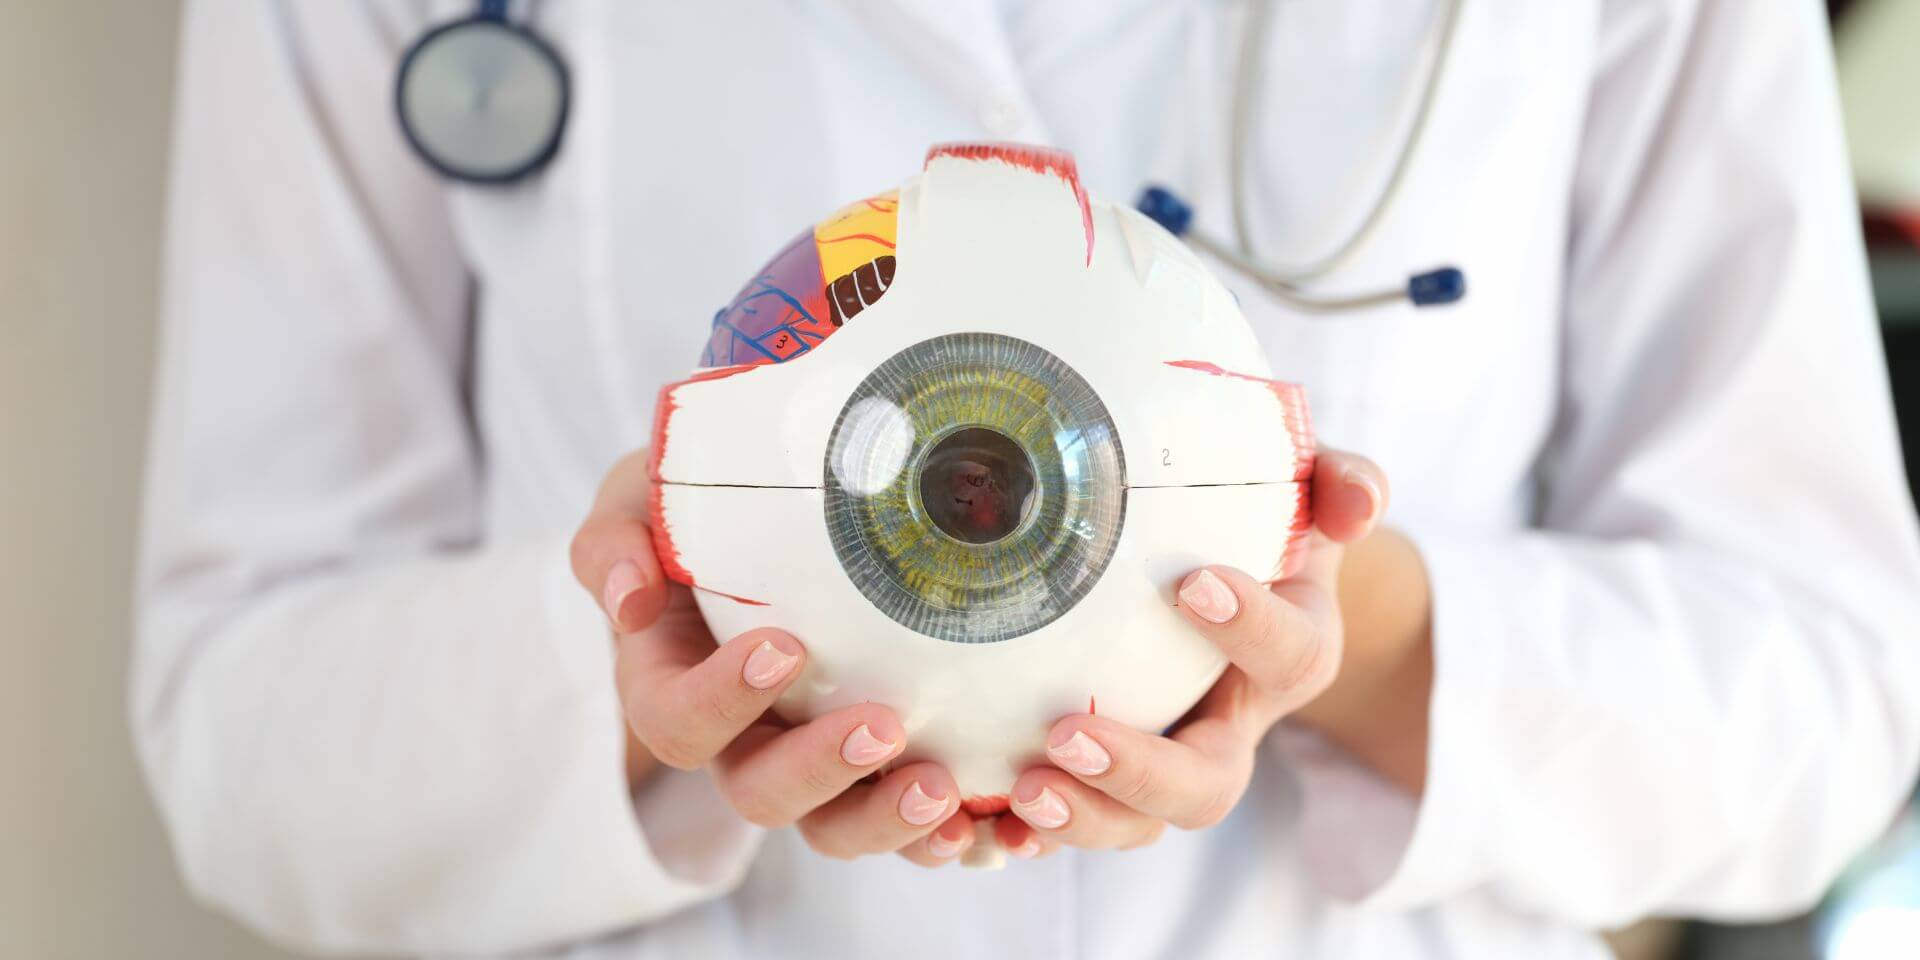 ophthalmologist holding a model of an eye